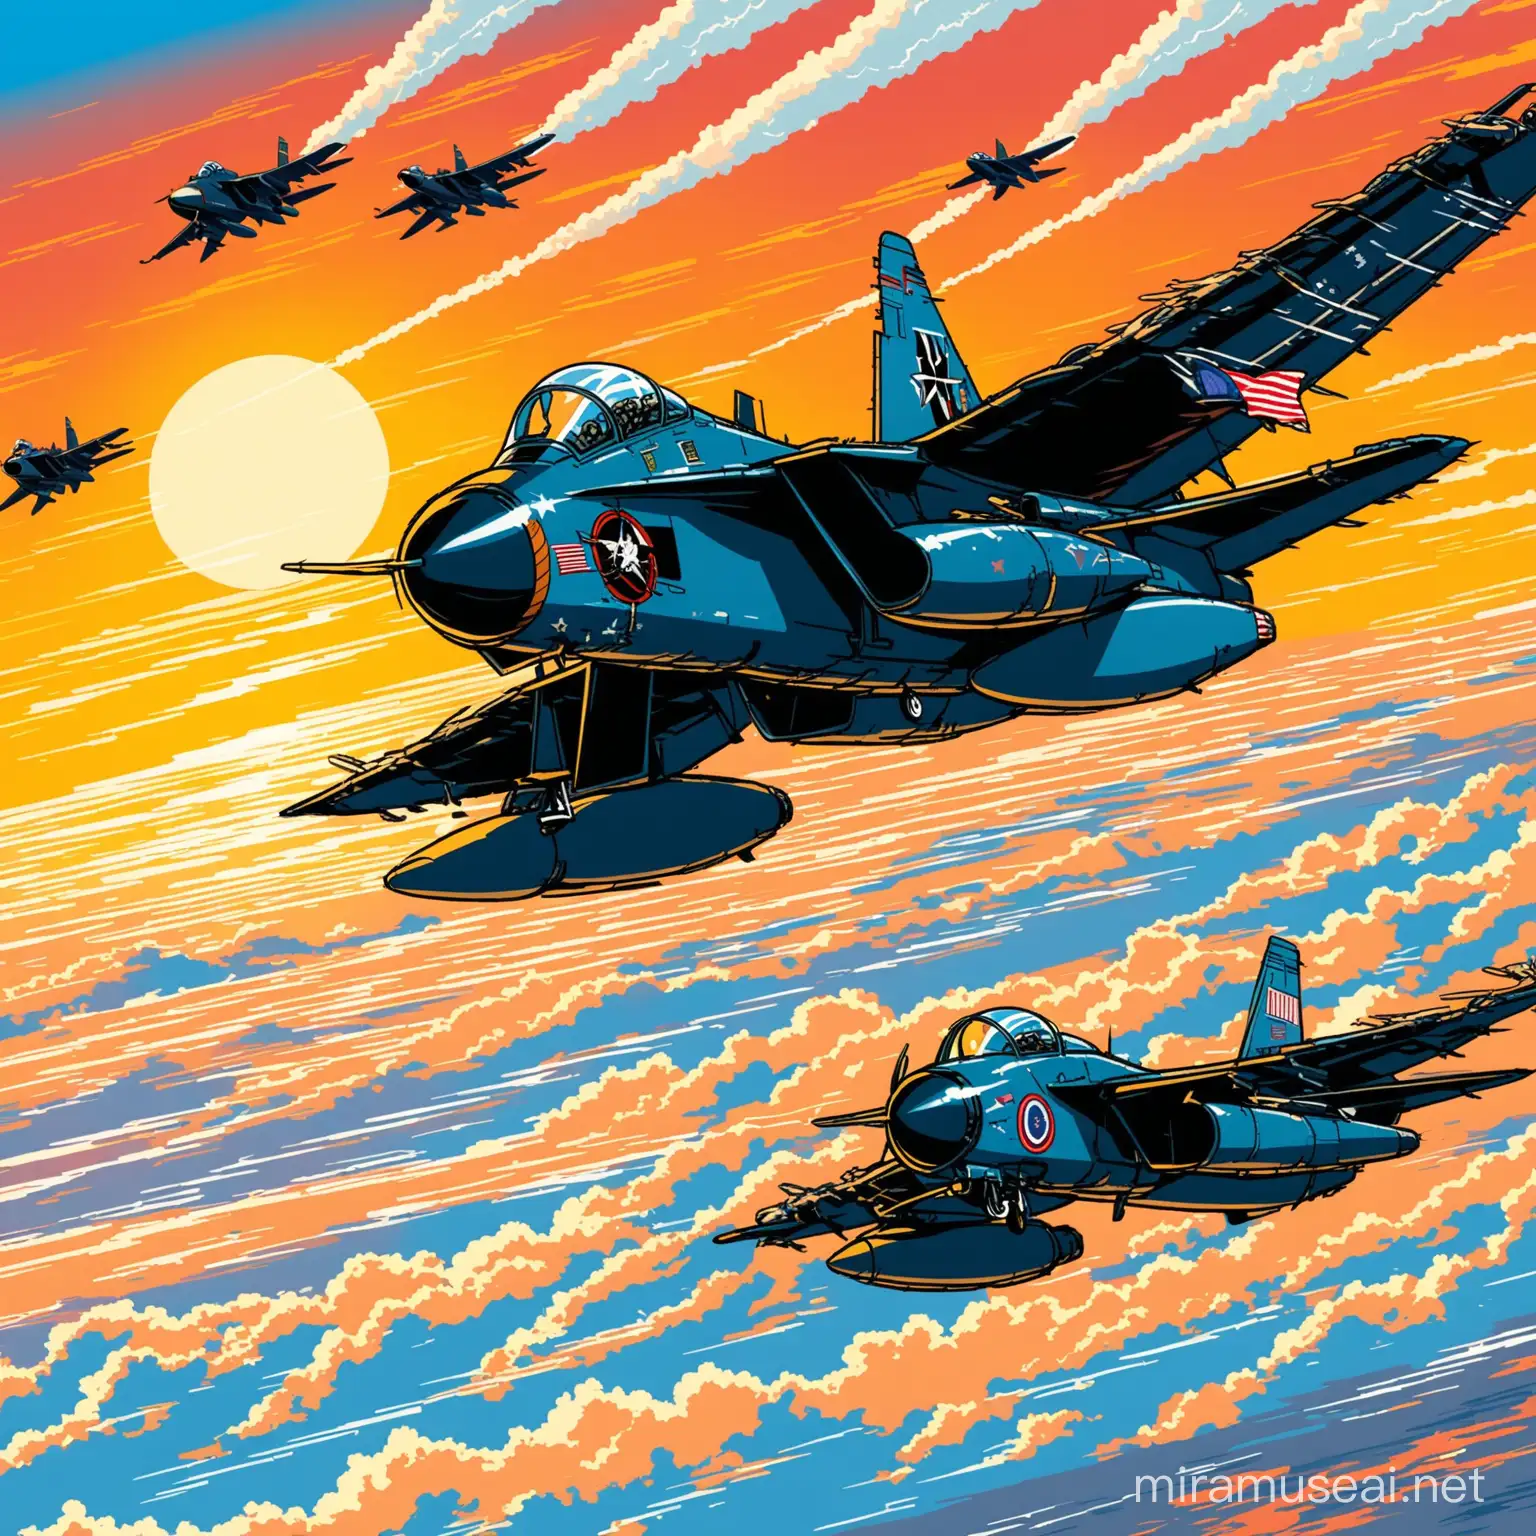 HighSpeed Chase Top Gun Planes Pursuing Russian Aircraft in Grindhouse Art Style